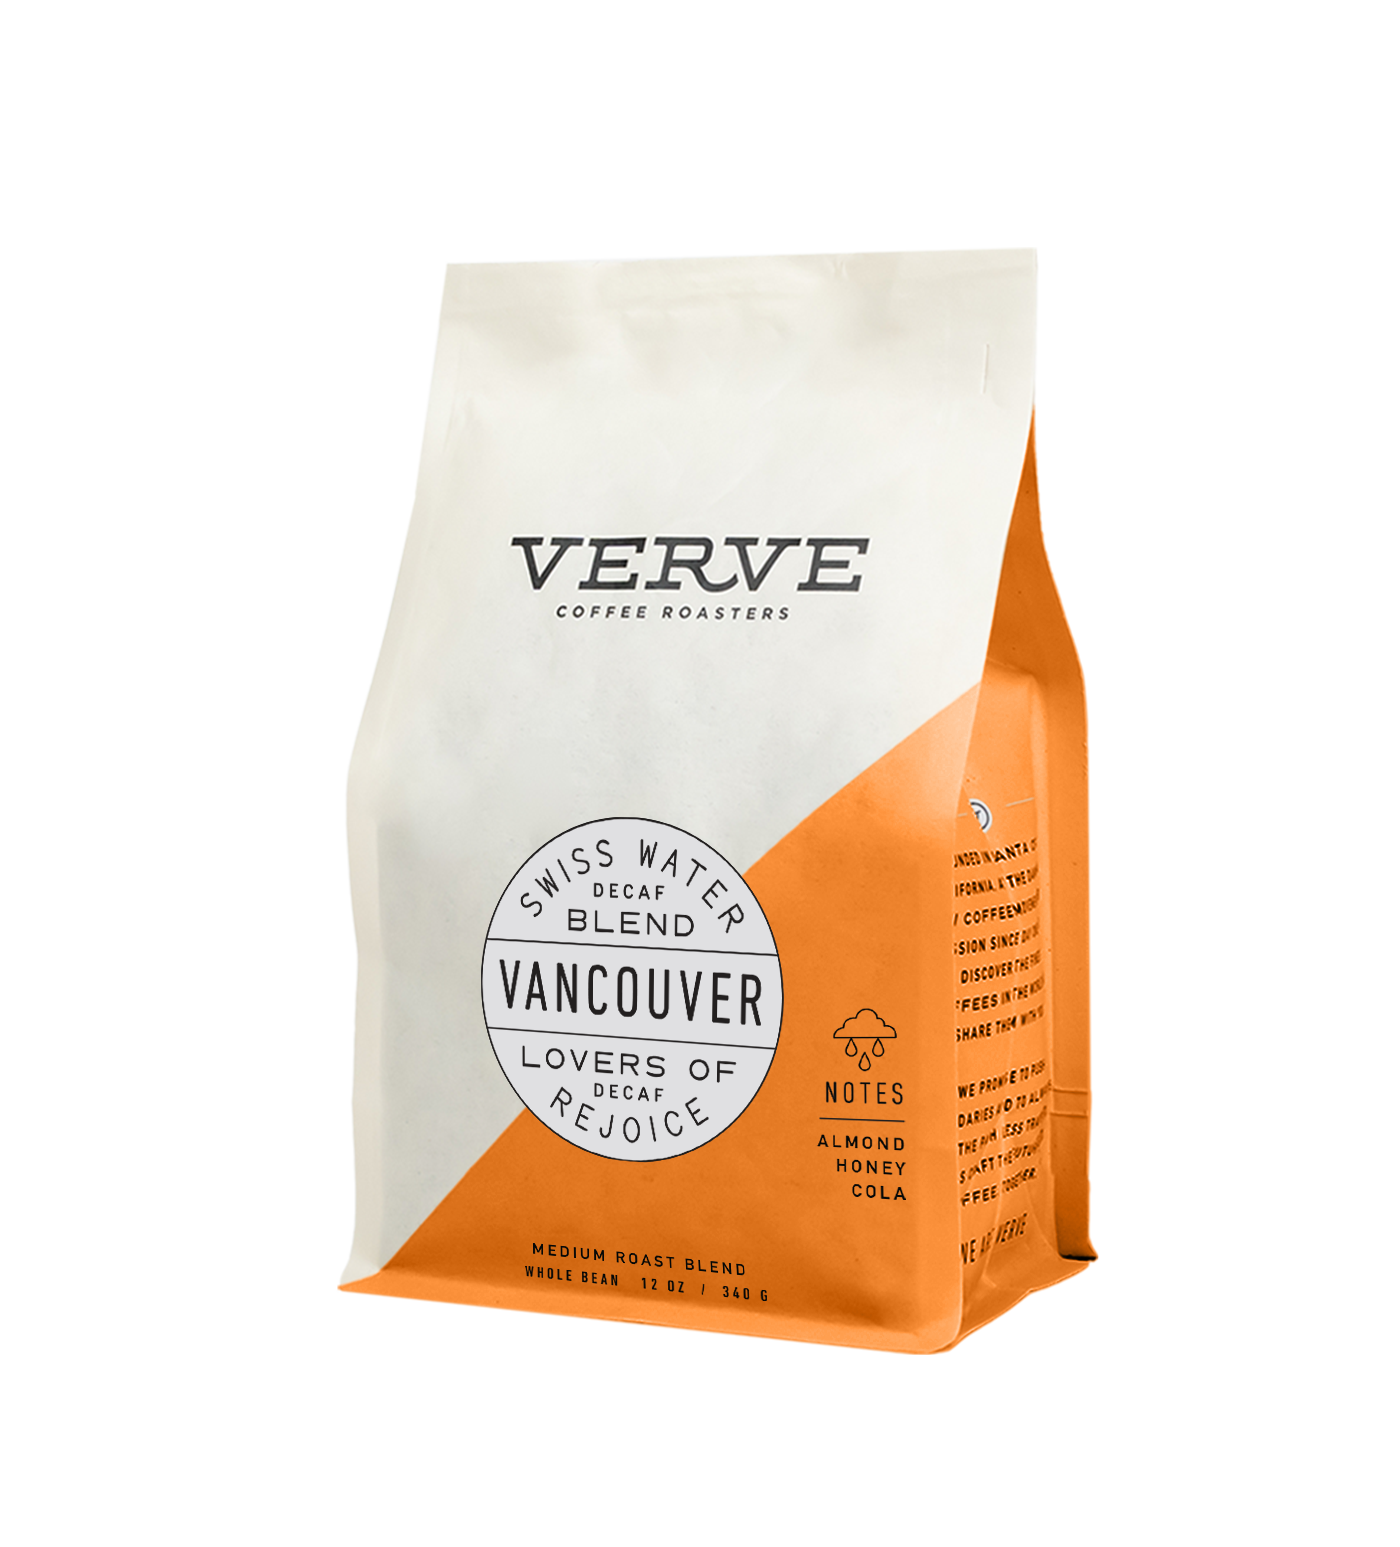 Vancouver swiss water decaf whole bean 